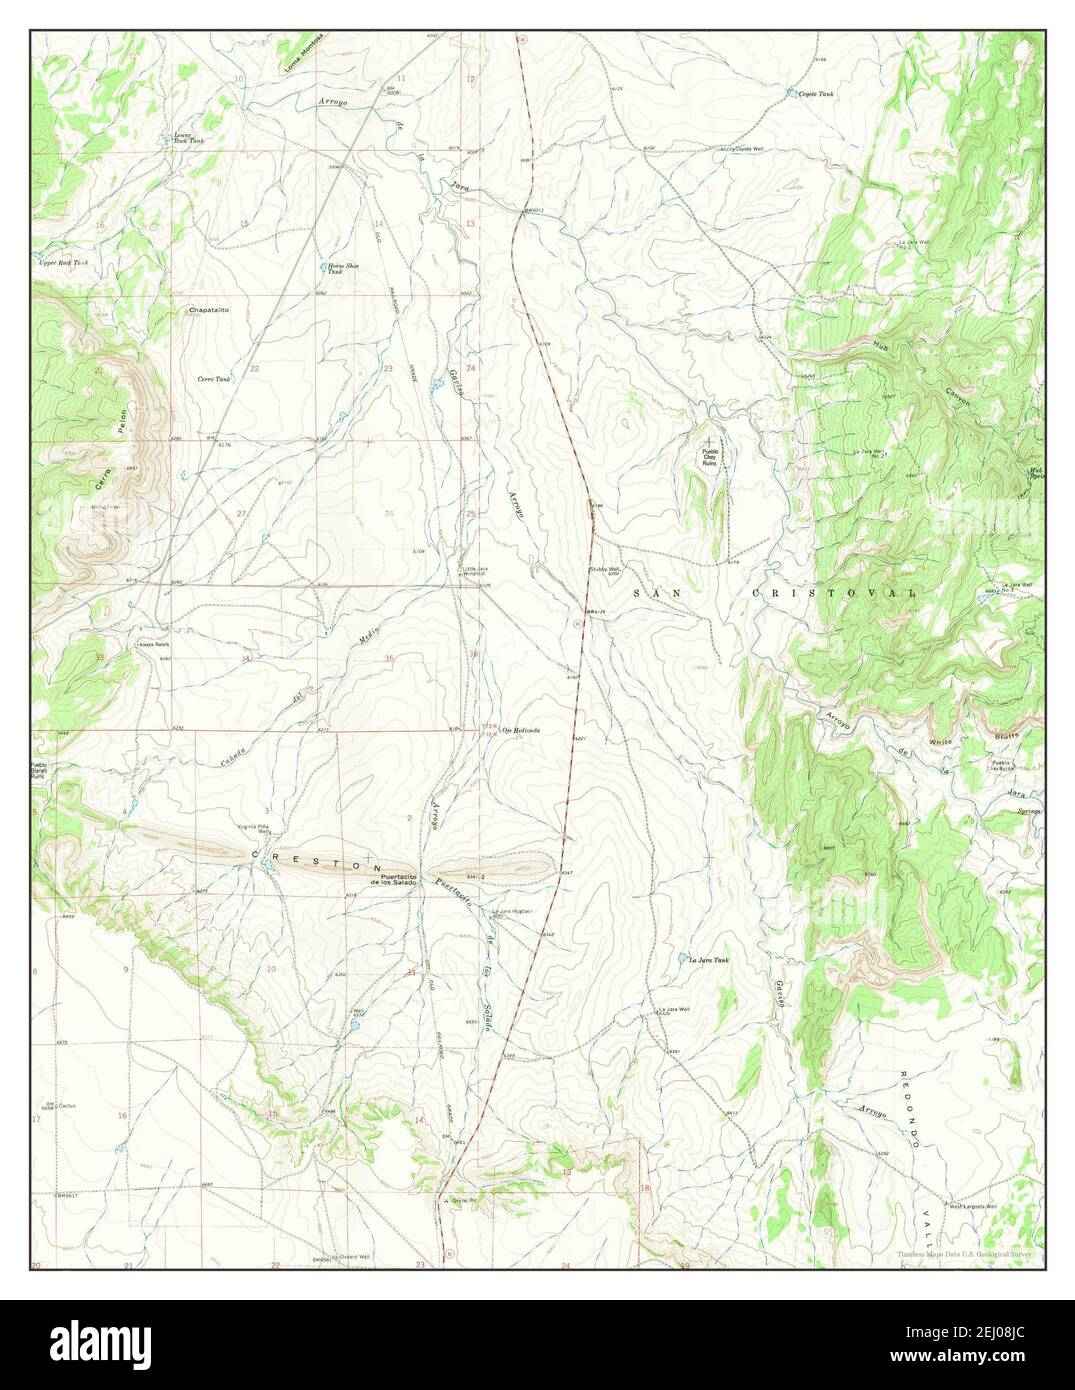 Ojo Hedionda, New Mexico, map 1966, 1:24000, United States of America by Timeless Maps, data U.S. Geological Survey Stock Photo